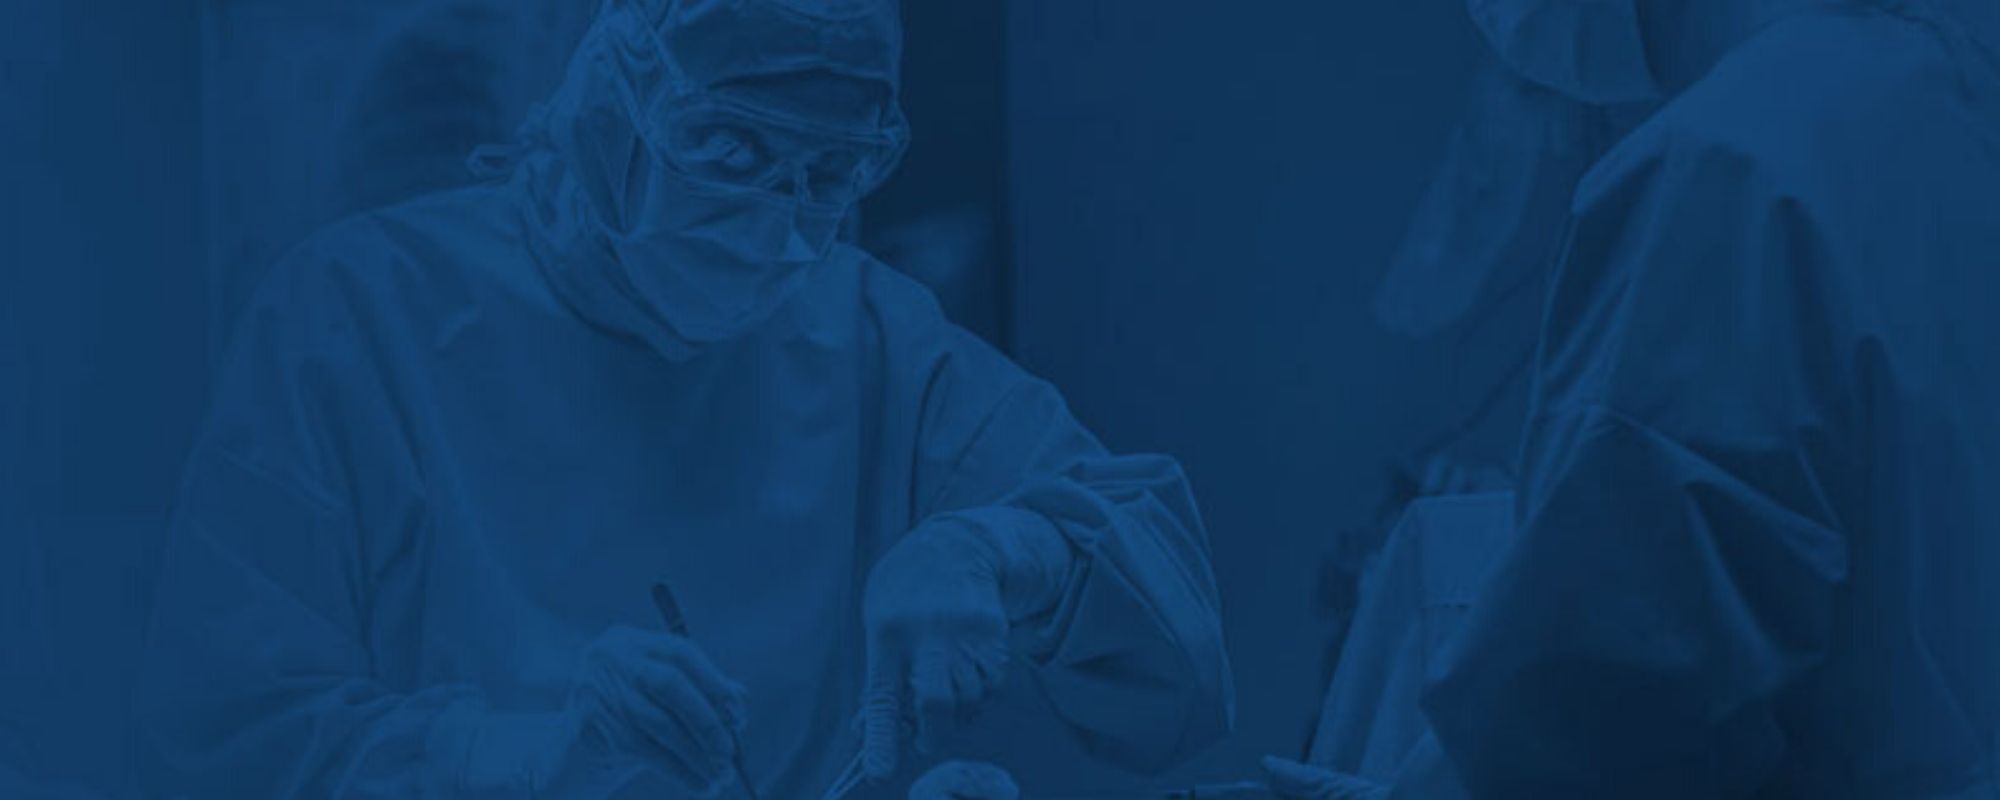 two people performing surgery with the image tinted blue